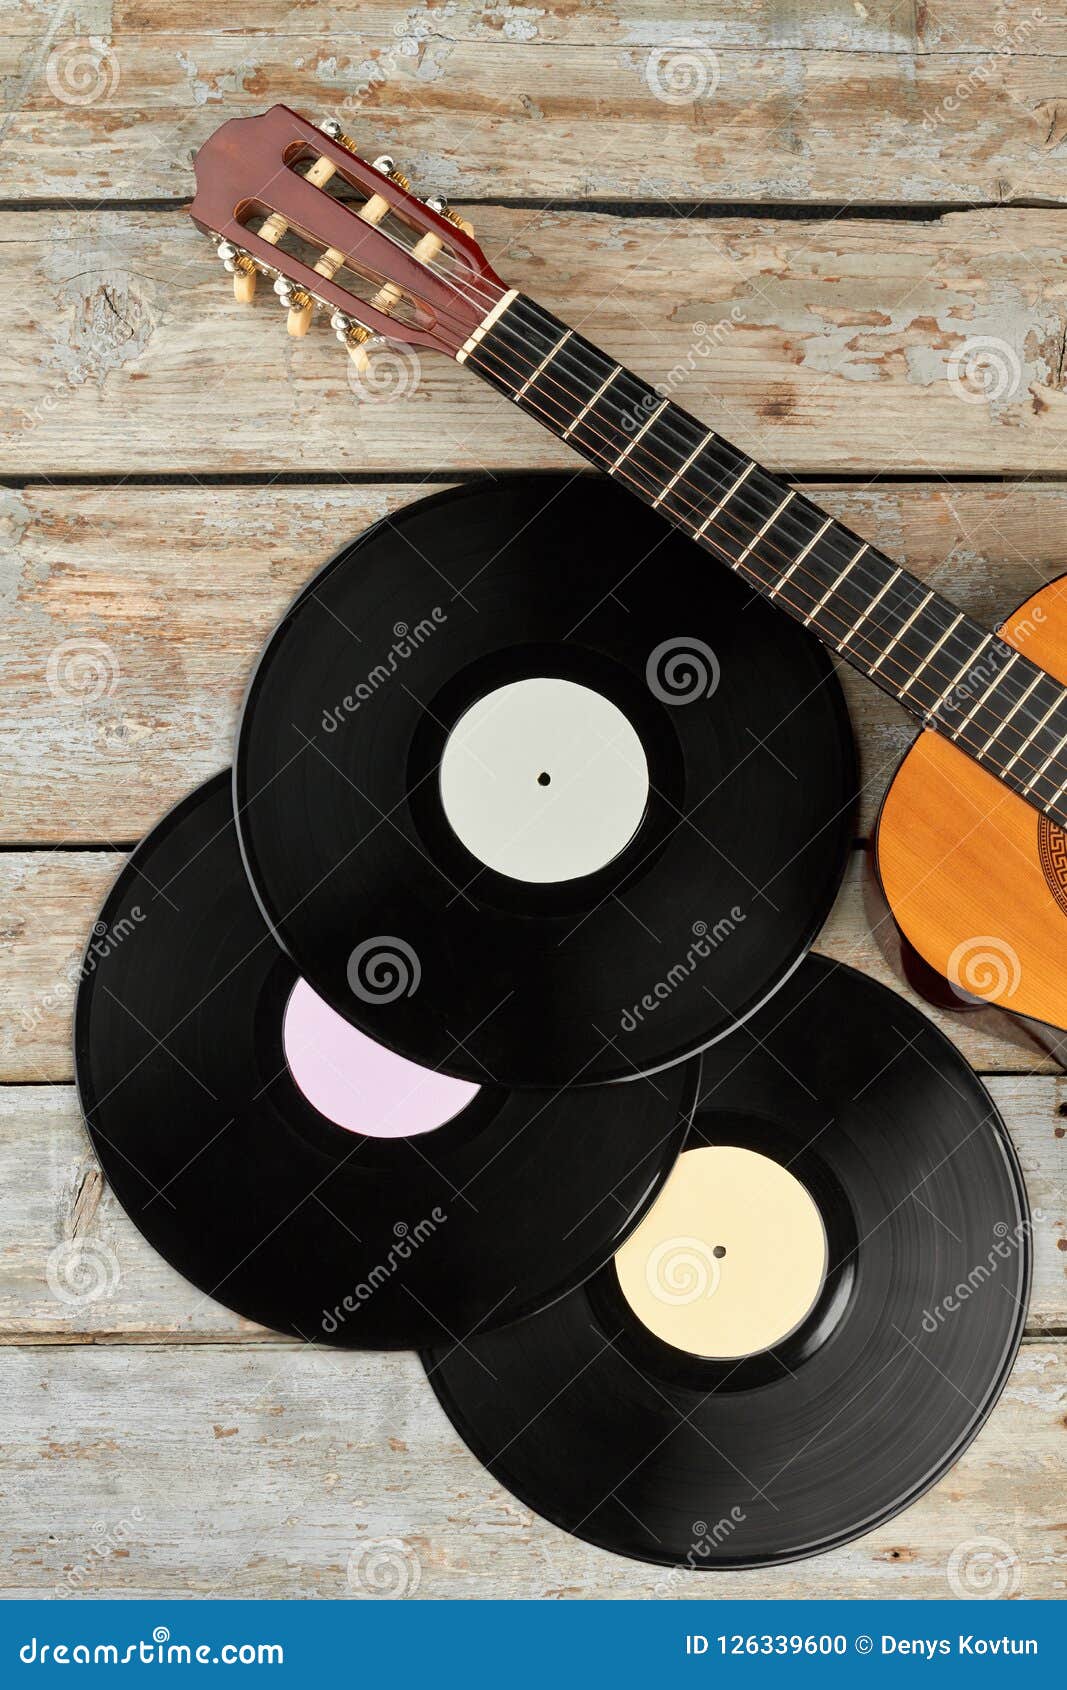 Vinyl Records and Wooden Guitar. Stock Photo - Image of melody, concert ...
